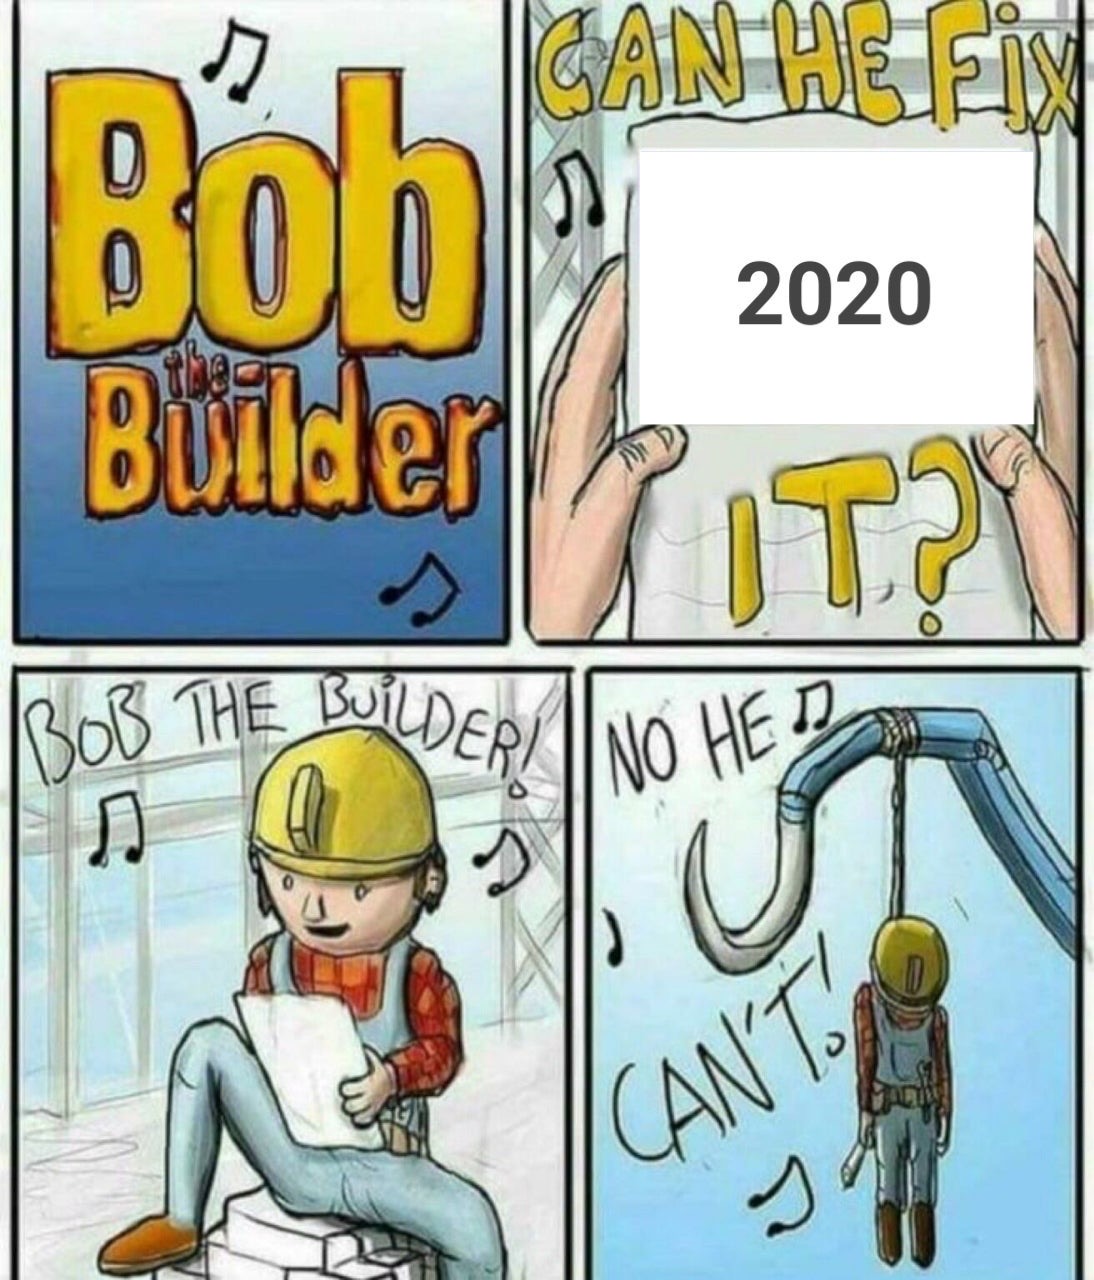 bob the builder can he fix it no he can t - Can We Fin Bob 2020 Builder It? Bob The Builder! || No Helps Un Anti g